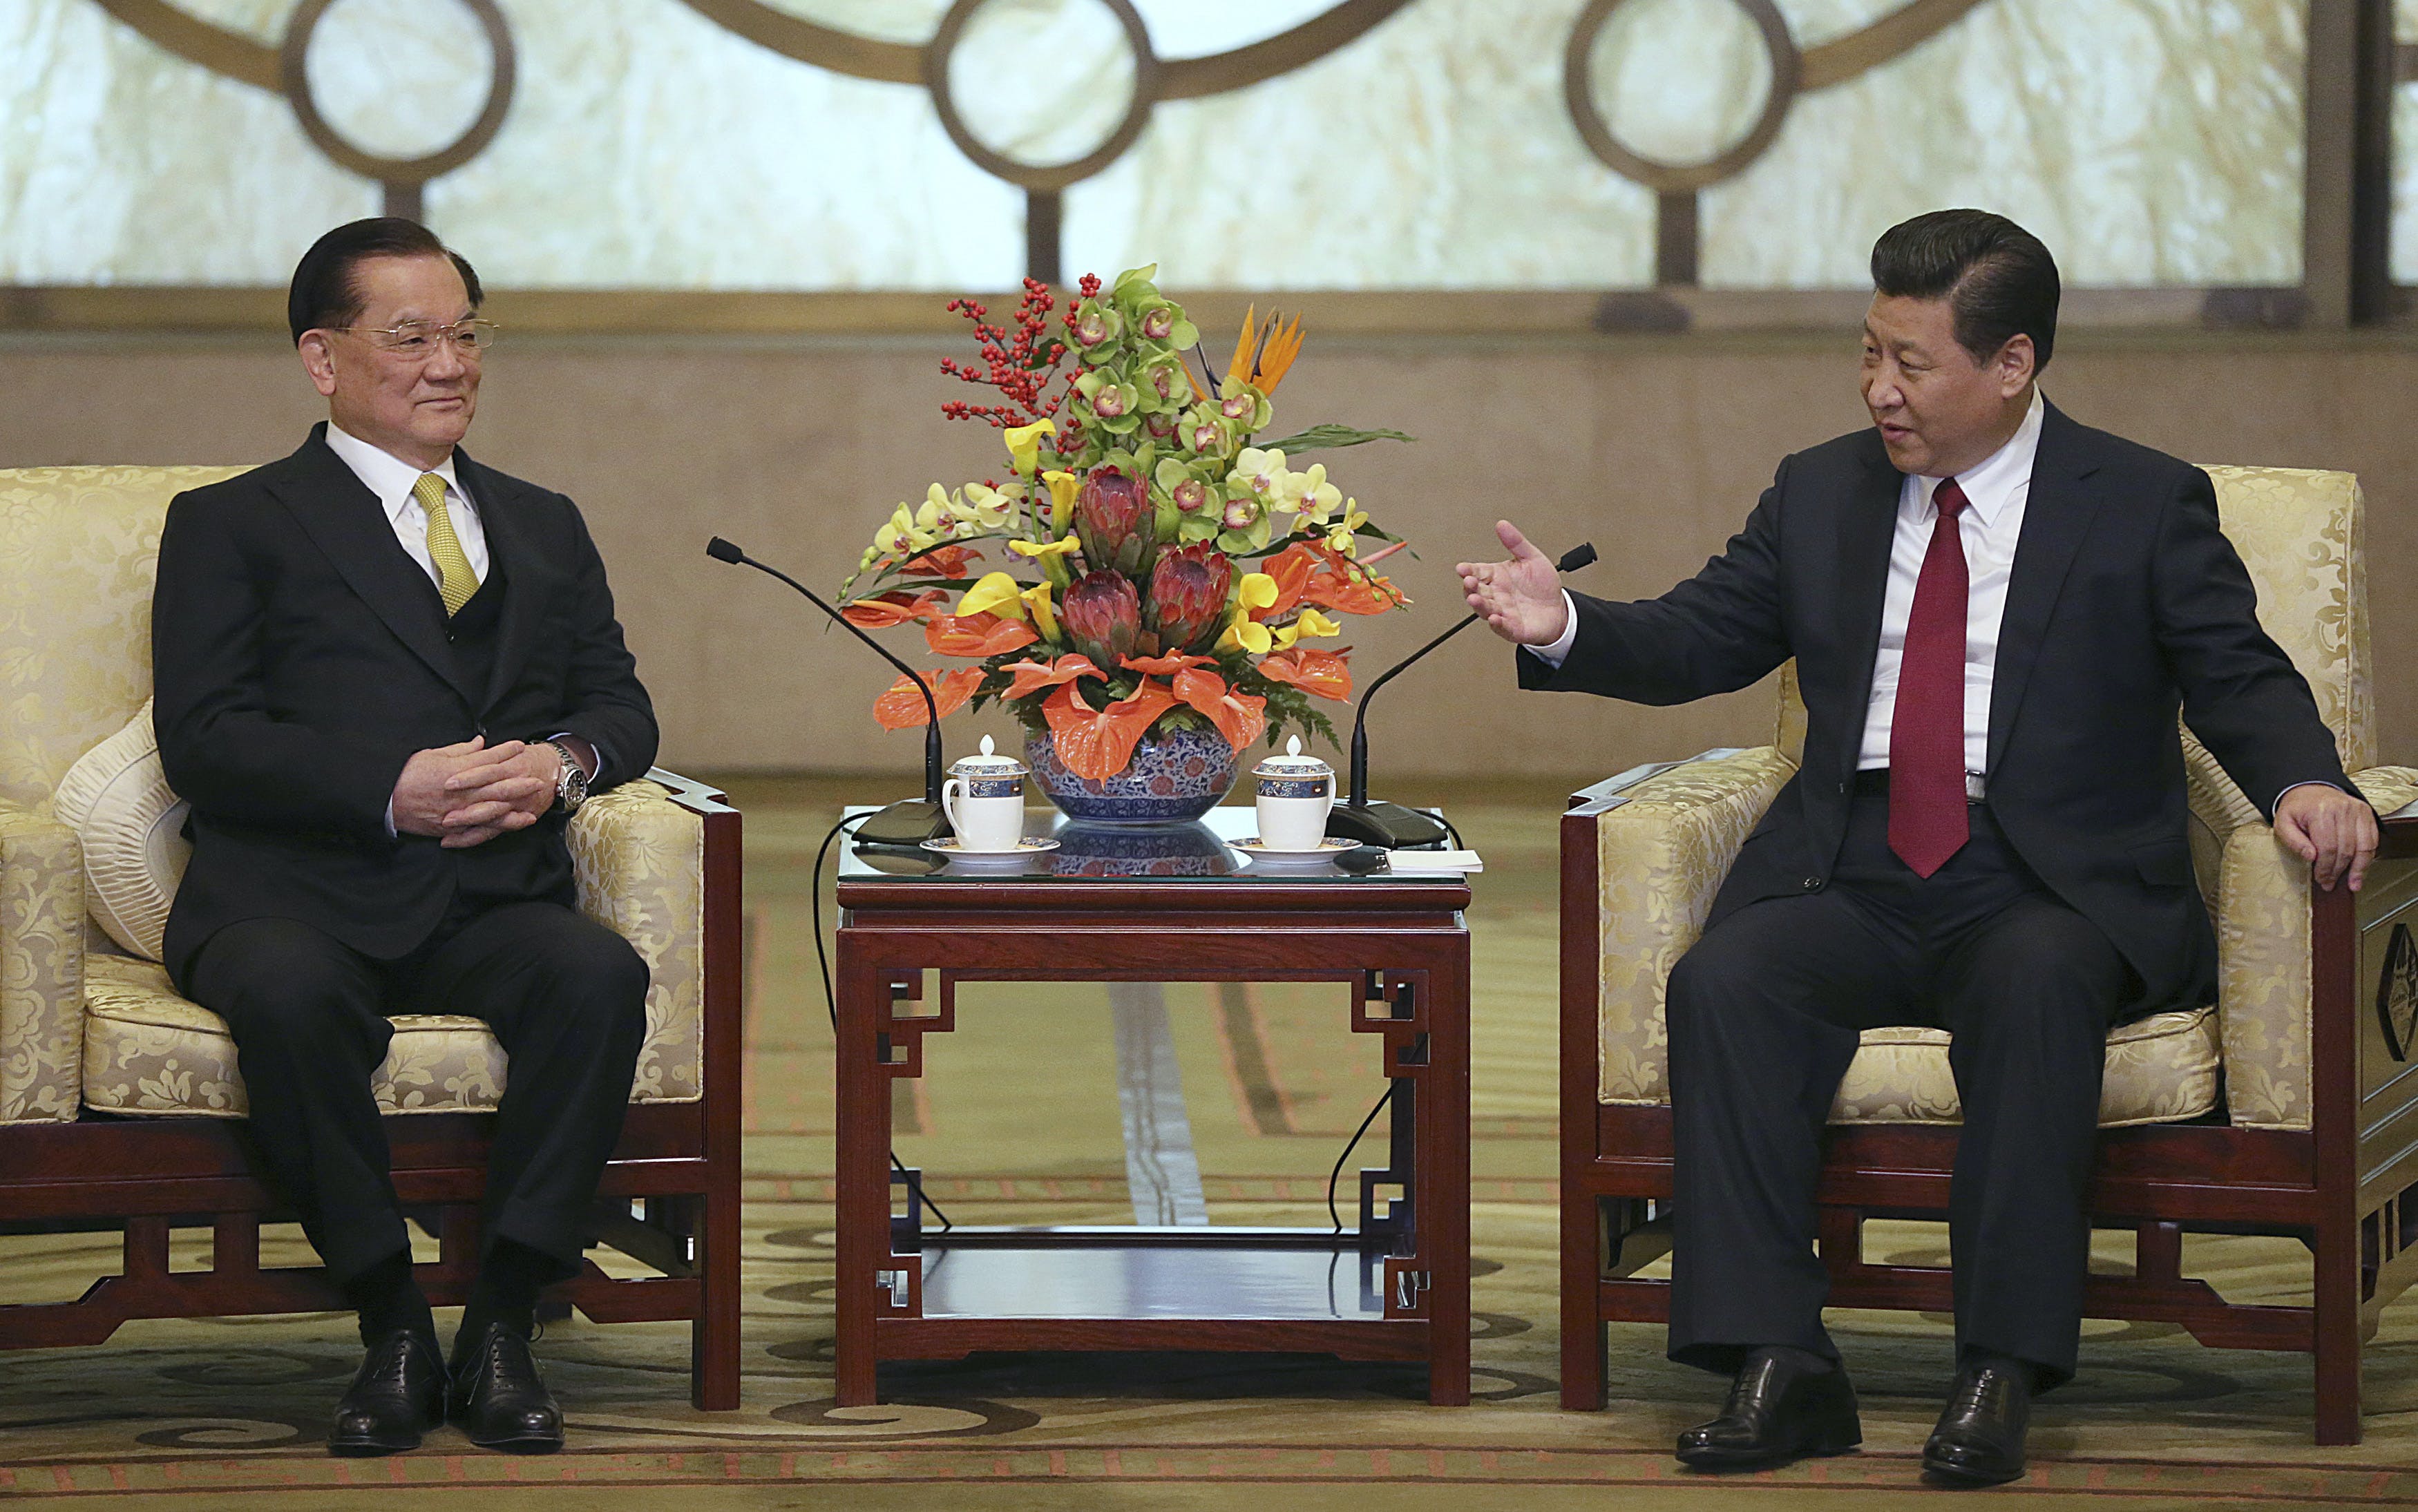 Former KMT Chairman Lian Zhan Addresses Retrocession of Taiwan in Meeting with Xi Jin-ping